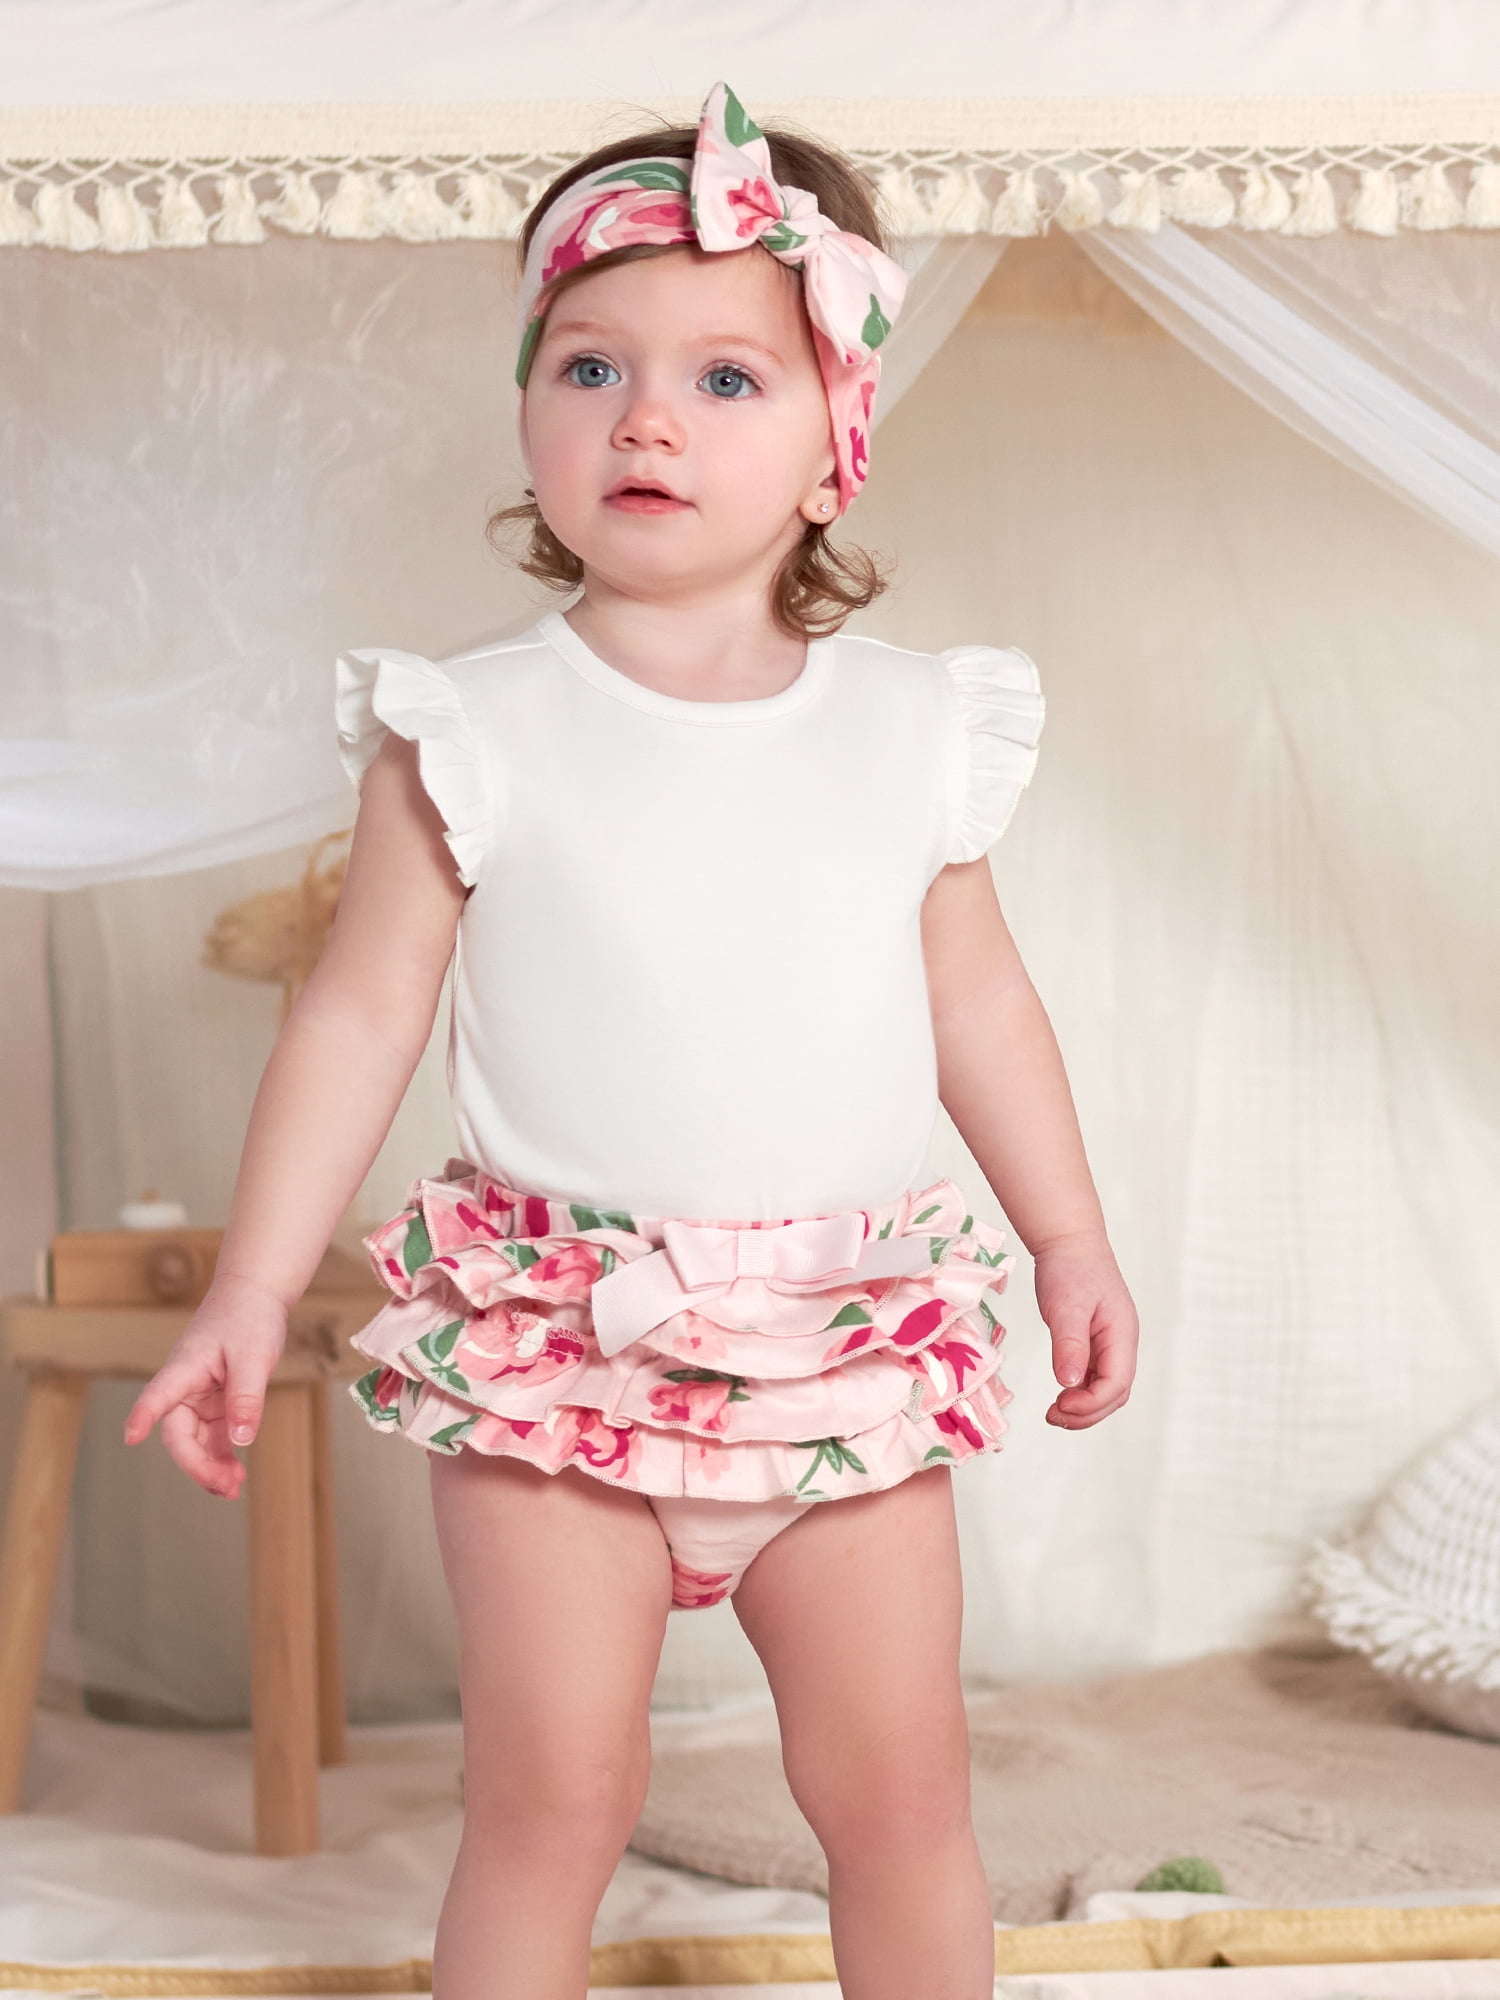 Infant Baby Girls Clothes Sets Flutter Sleeve Romper Bodysuit Tops & Floral Bloomer Shorts Headband 3Pcs Outfits 